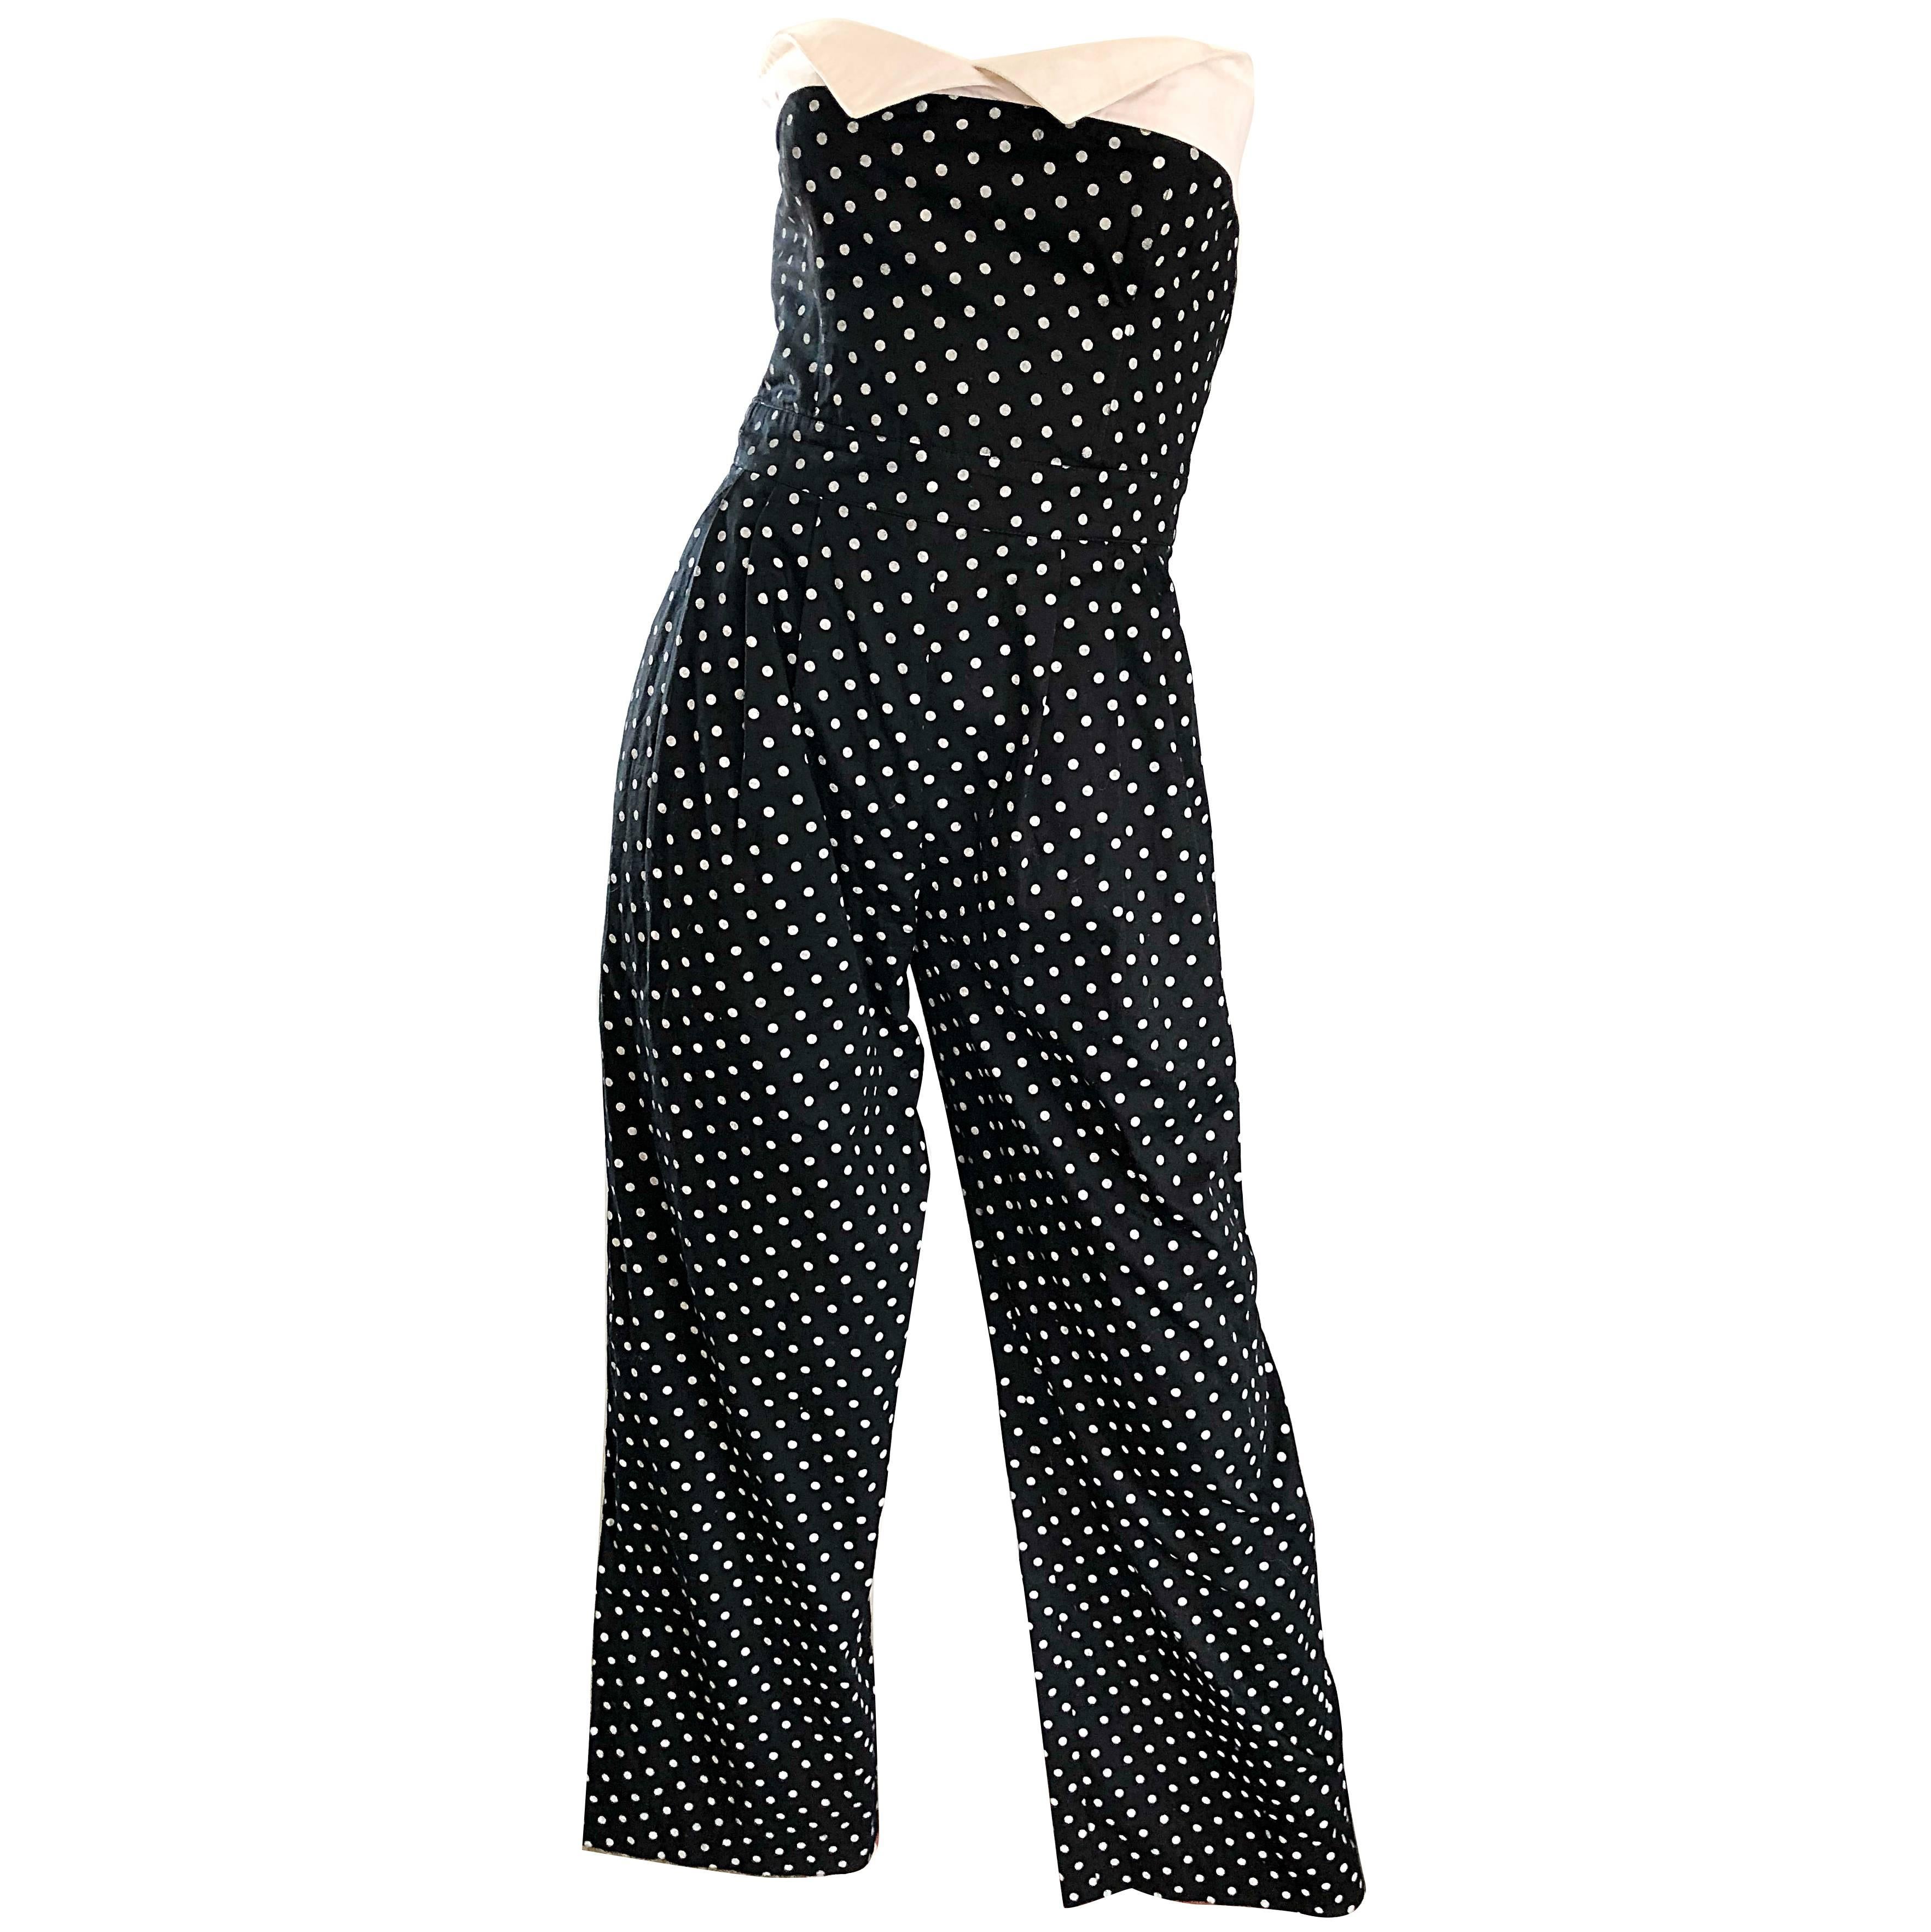 Escada by Margaretha Ley Vintage 1990s Black and White Polka Dot 90s Jumpsuit